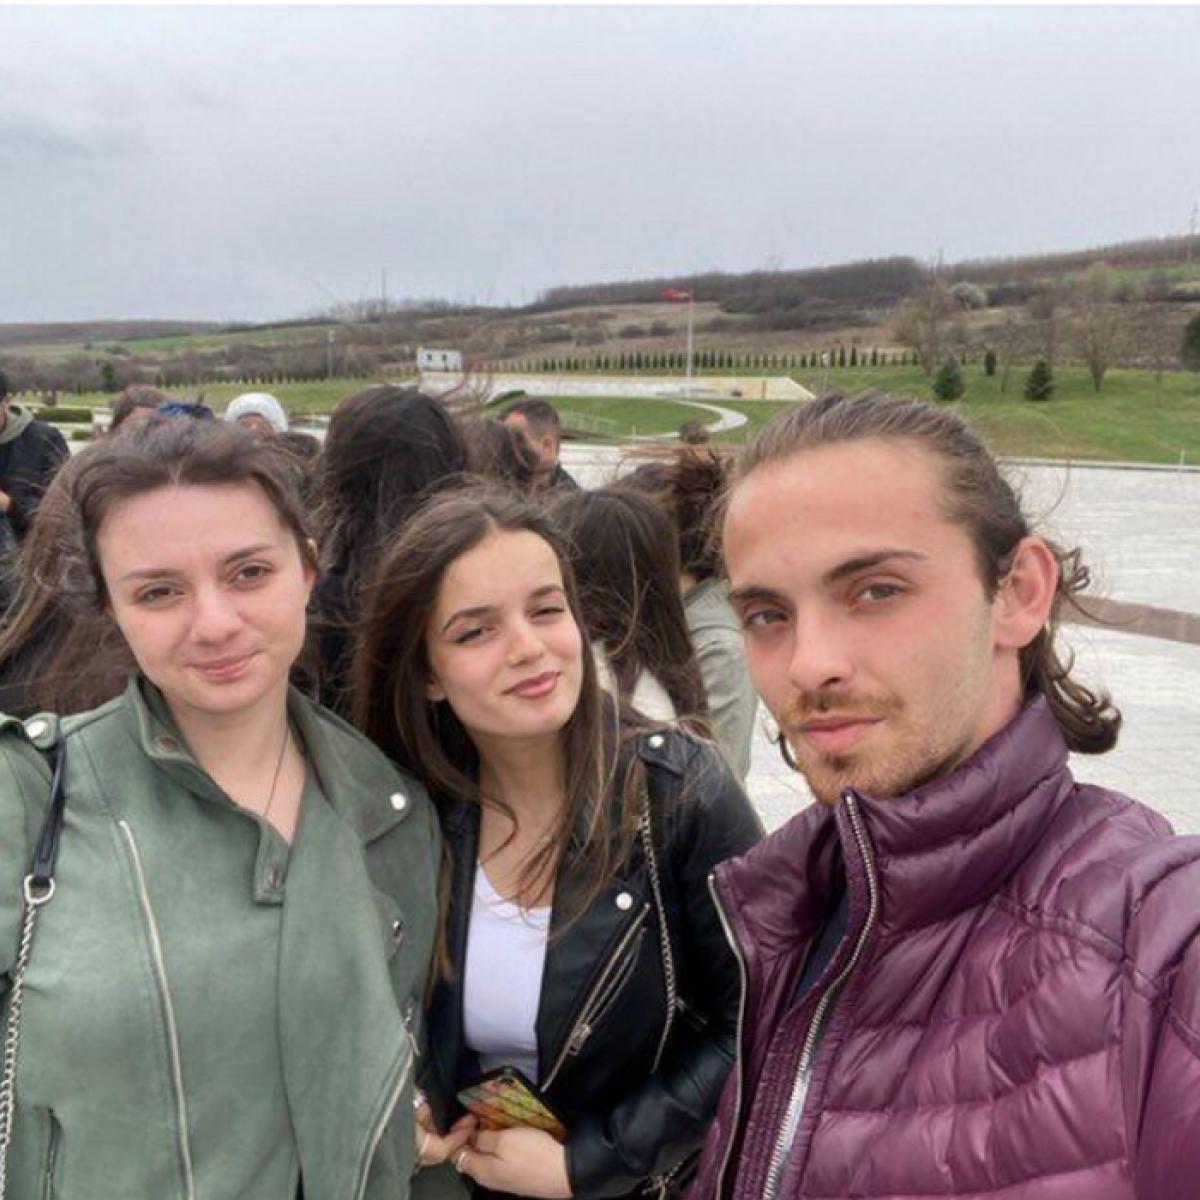 YOUNG PEOPLE FIND RECONCILIATION AND HOPE IN A NEW SEASON FOR KOSOVO